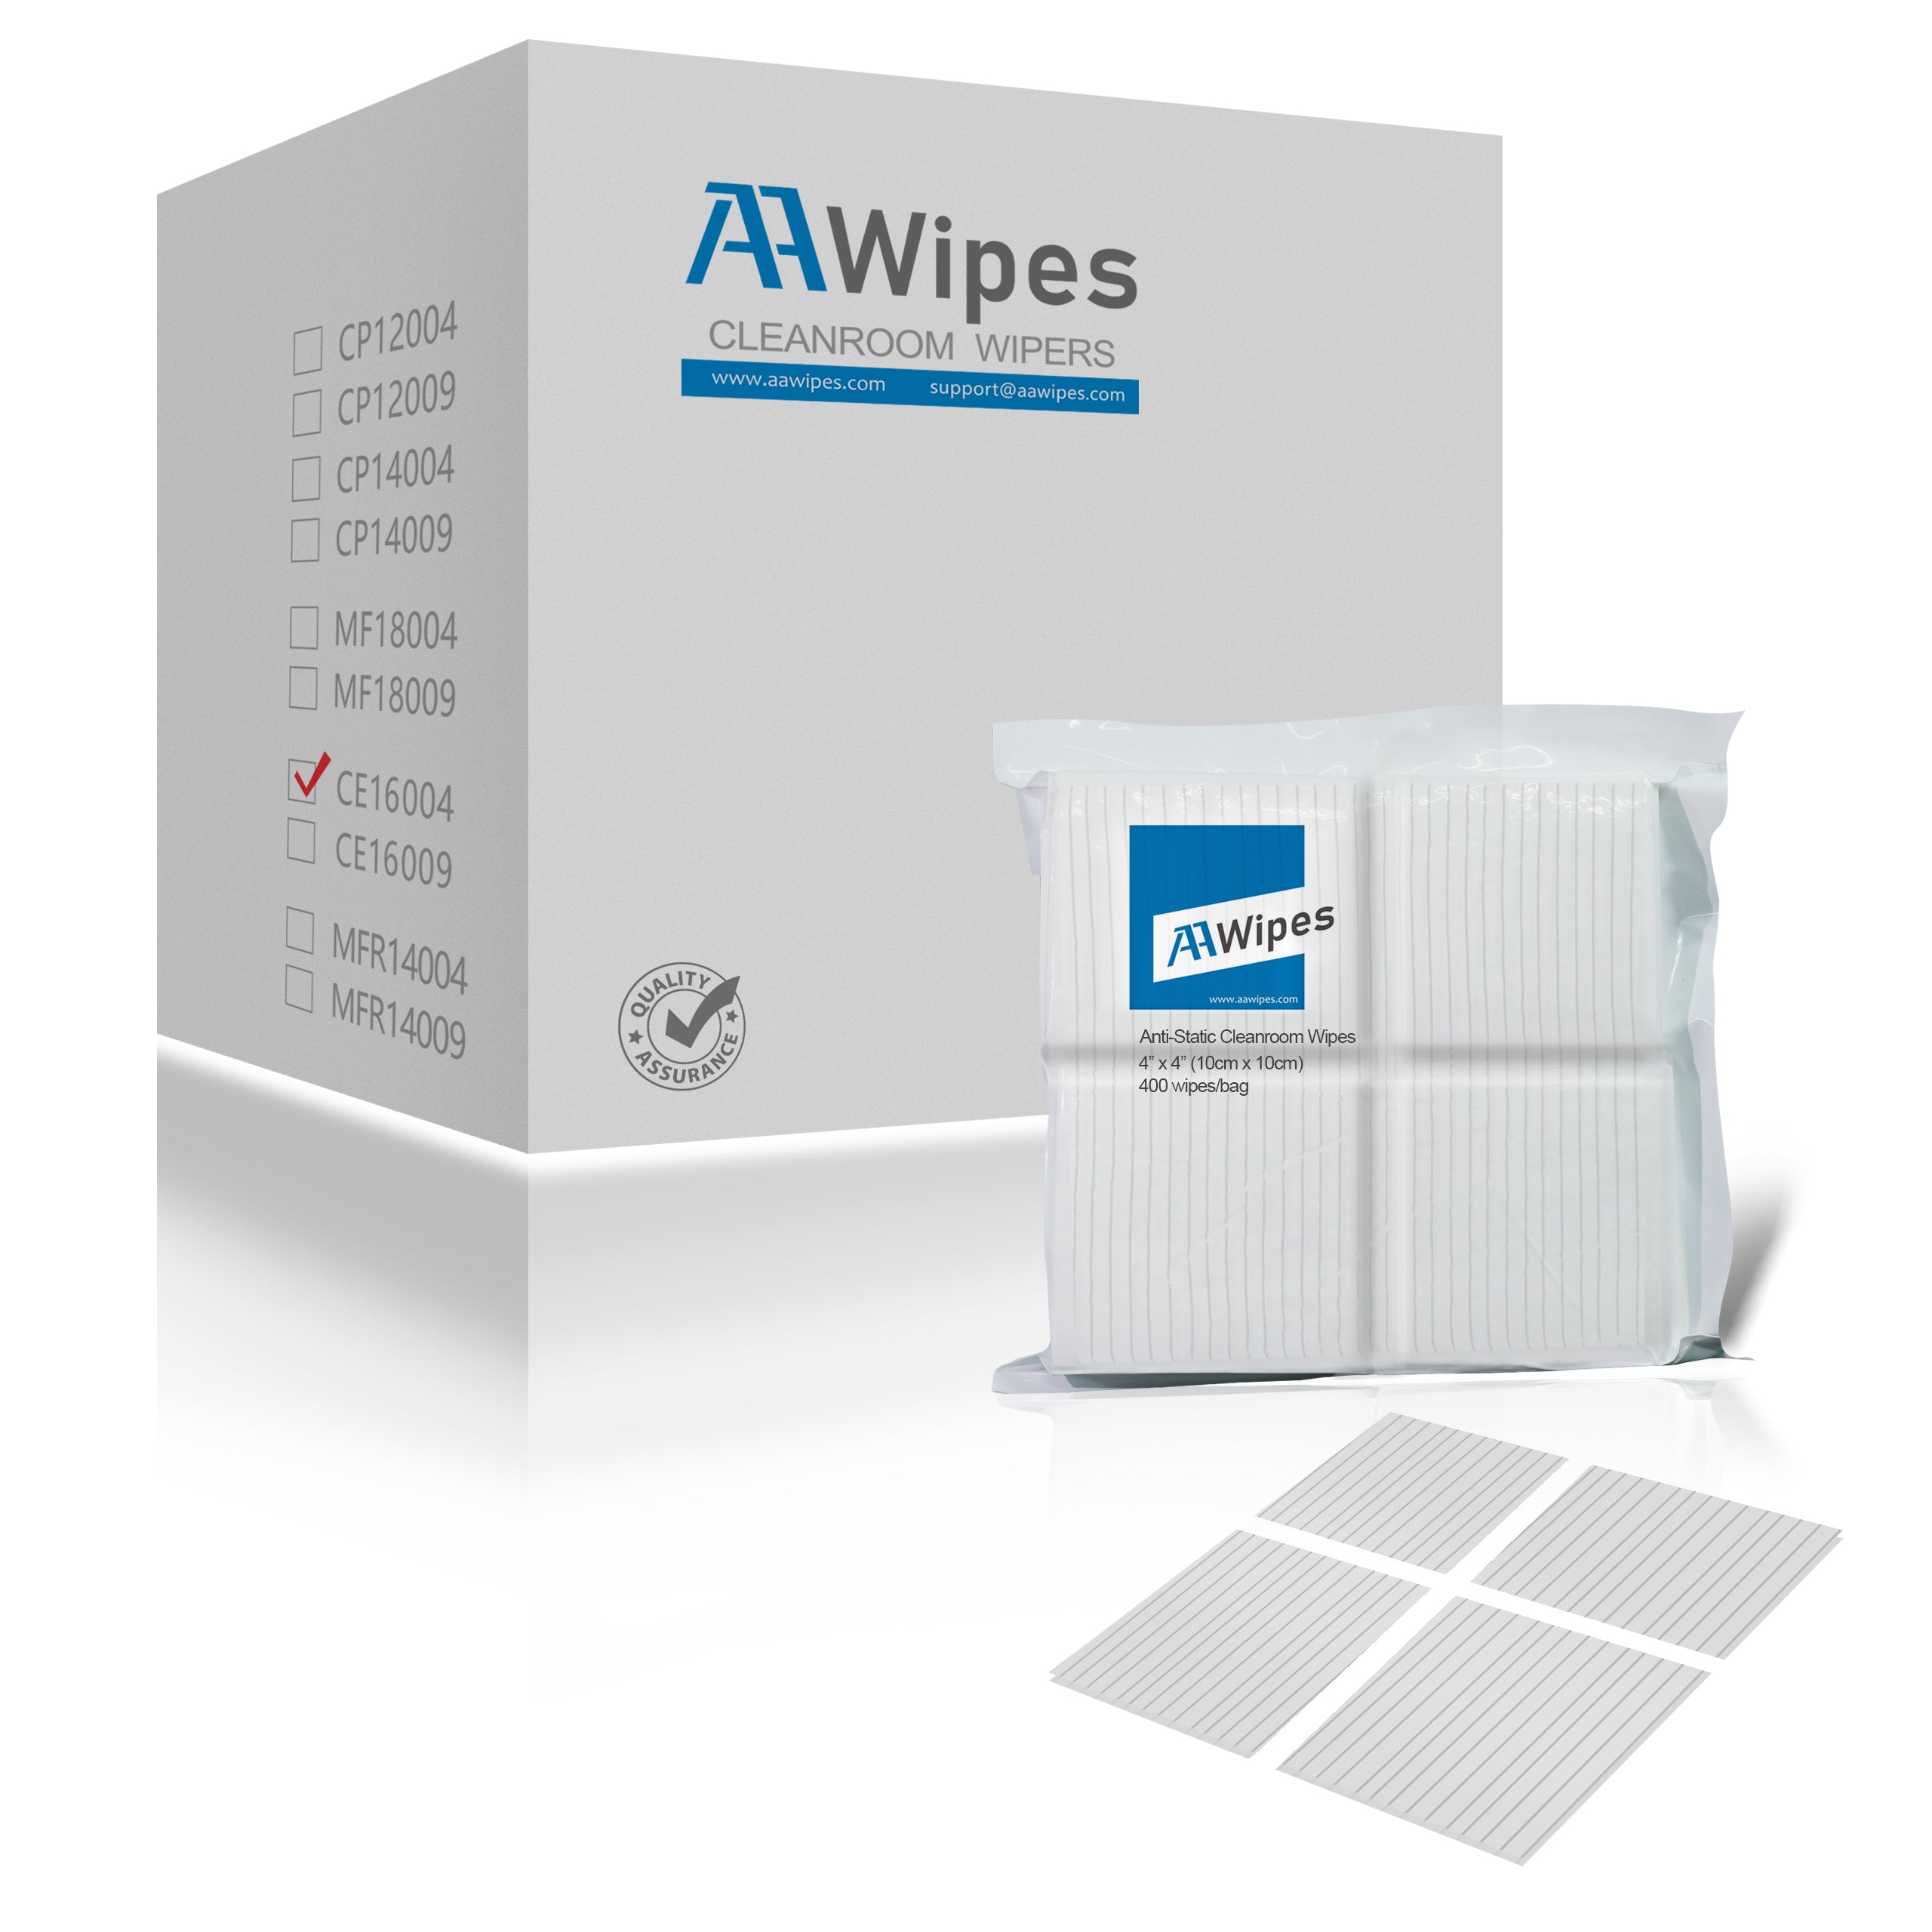 Ultra-low Lint Wiper Aerospace Sensative Surface Wiping Cleanroom cloth Anti-Static ESD Wipes 4"x4"  (Starting at 1 Box with 8,000 Wipes per 20 Bags) (No. CE16004)